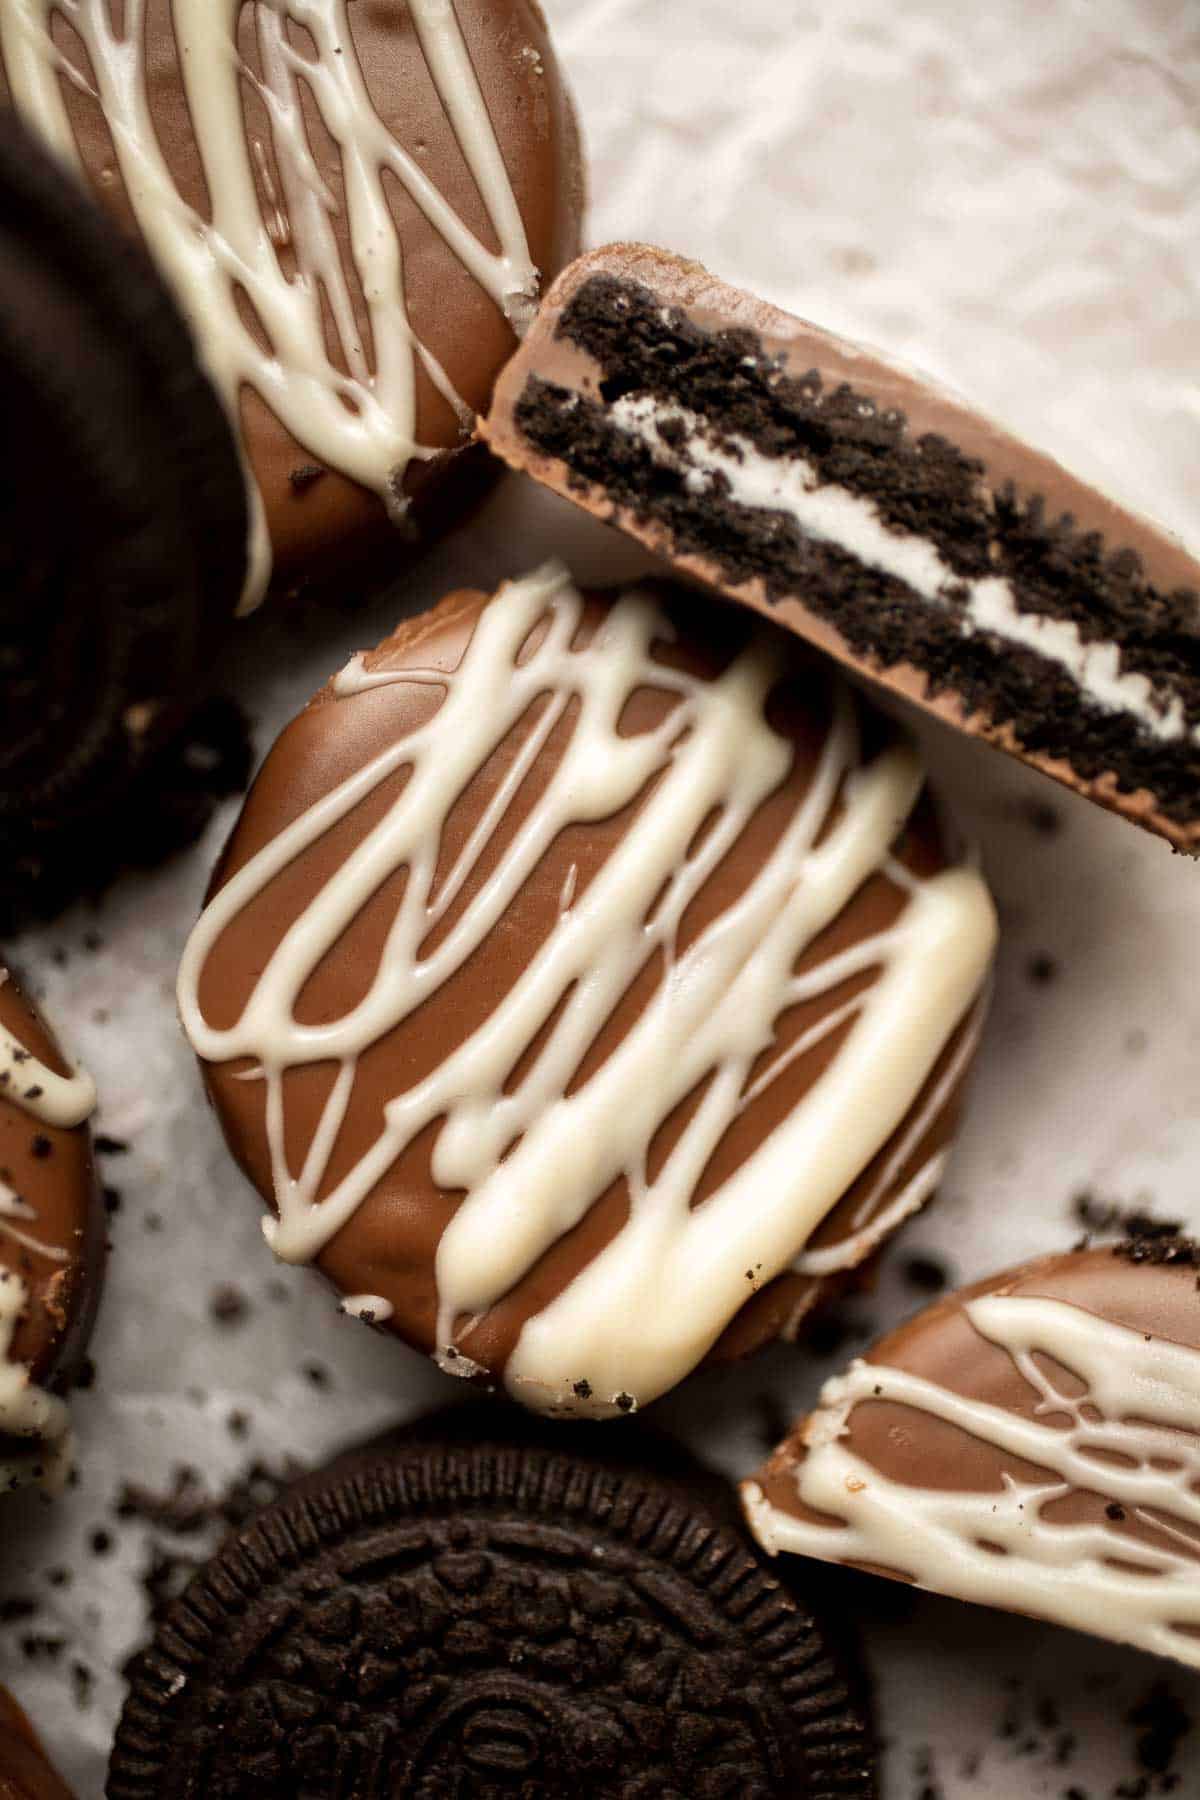 Chocolate Covered Oreos are a perfect last minute treat! Level up regular Oreos with a layer of semi-sweet chocolate and a white chocolate drizzle on top. | aheadofthyme.com